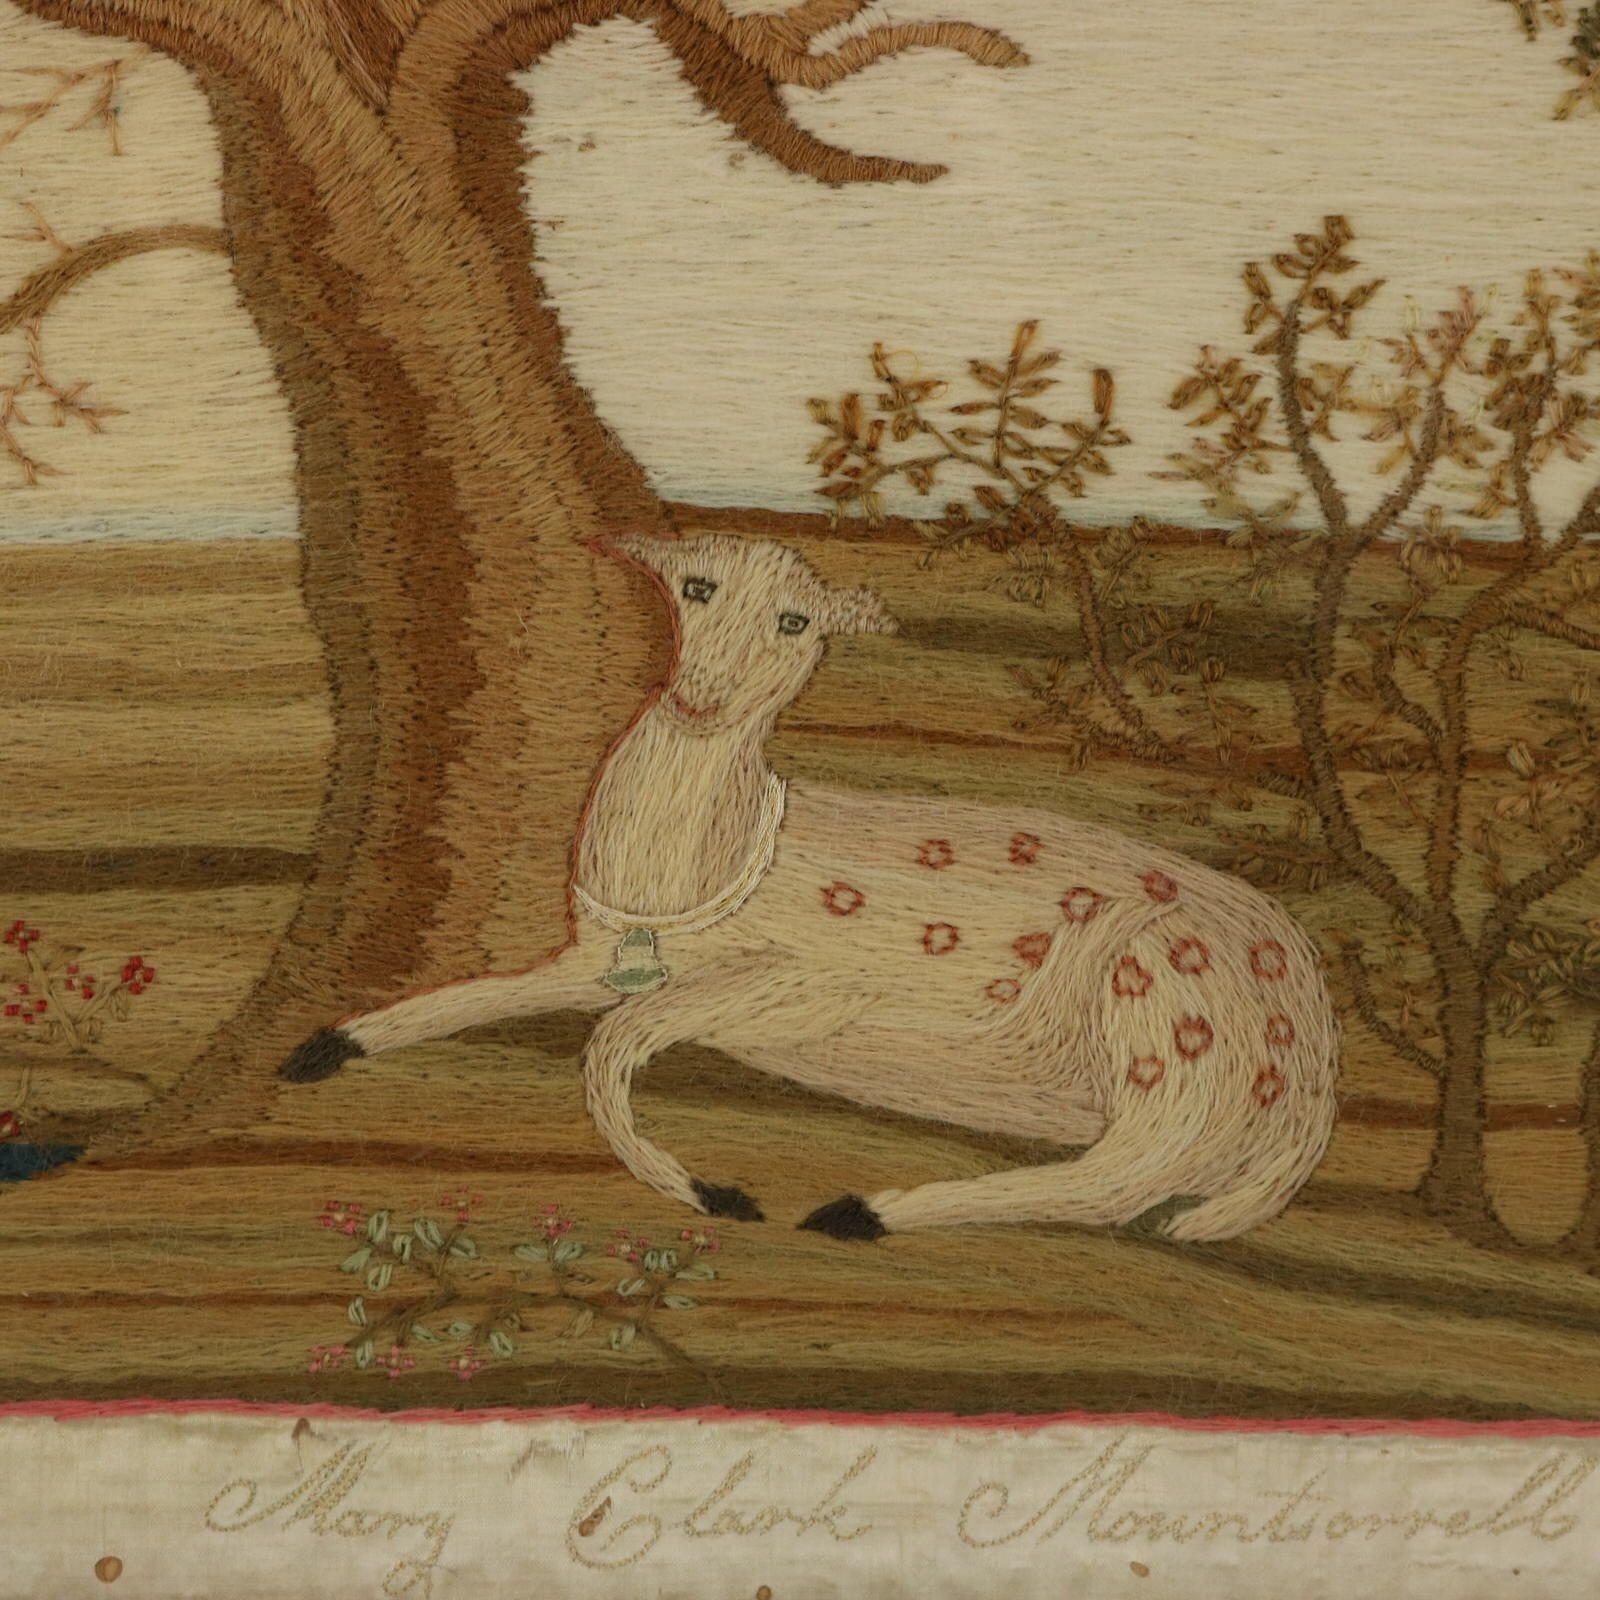 Regency period woolwork embroidered picture of a deer in a country scene. The embroidery is worked in wool on a canvas ground, in a variety of stitches. Pictorial scene depicts a recumbent deer in front of trees. Set in a country landscape.